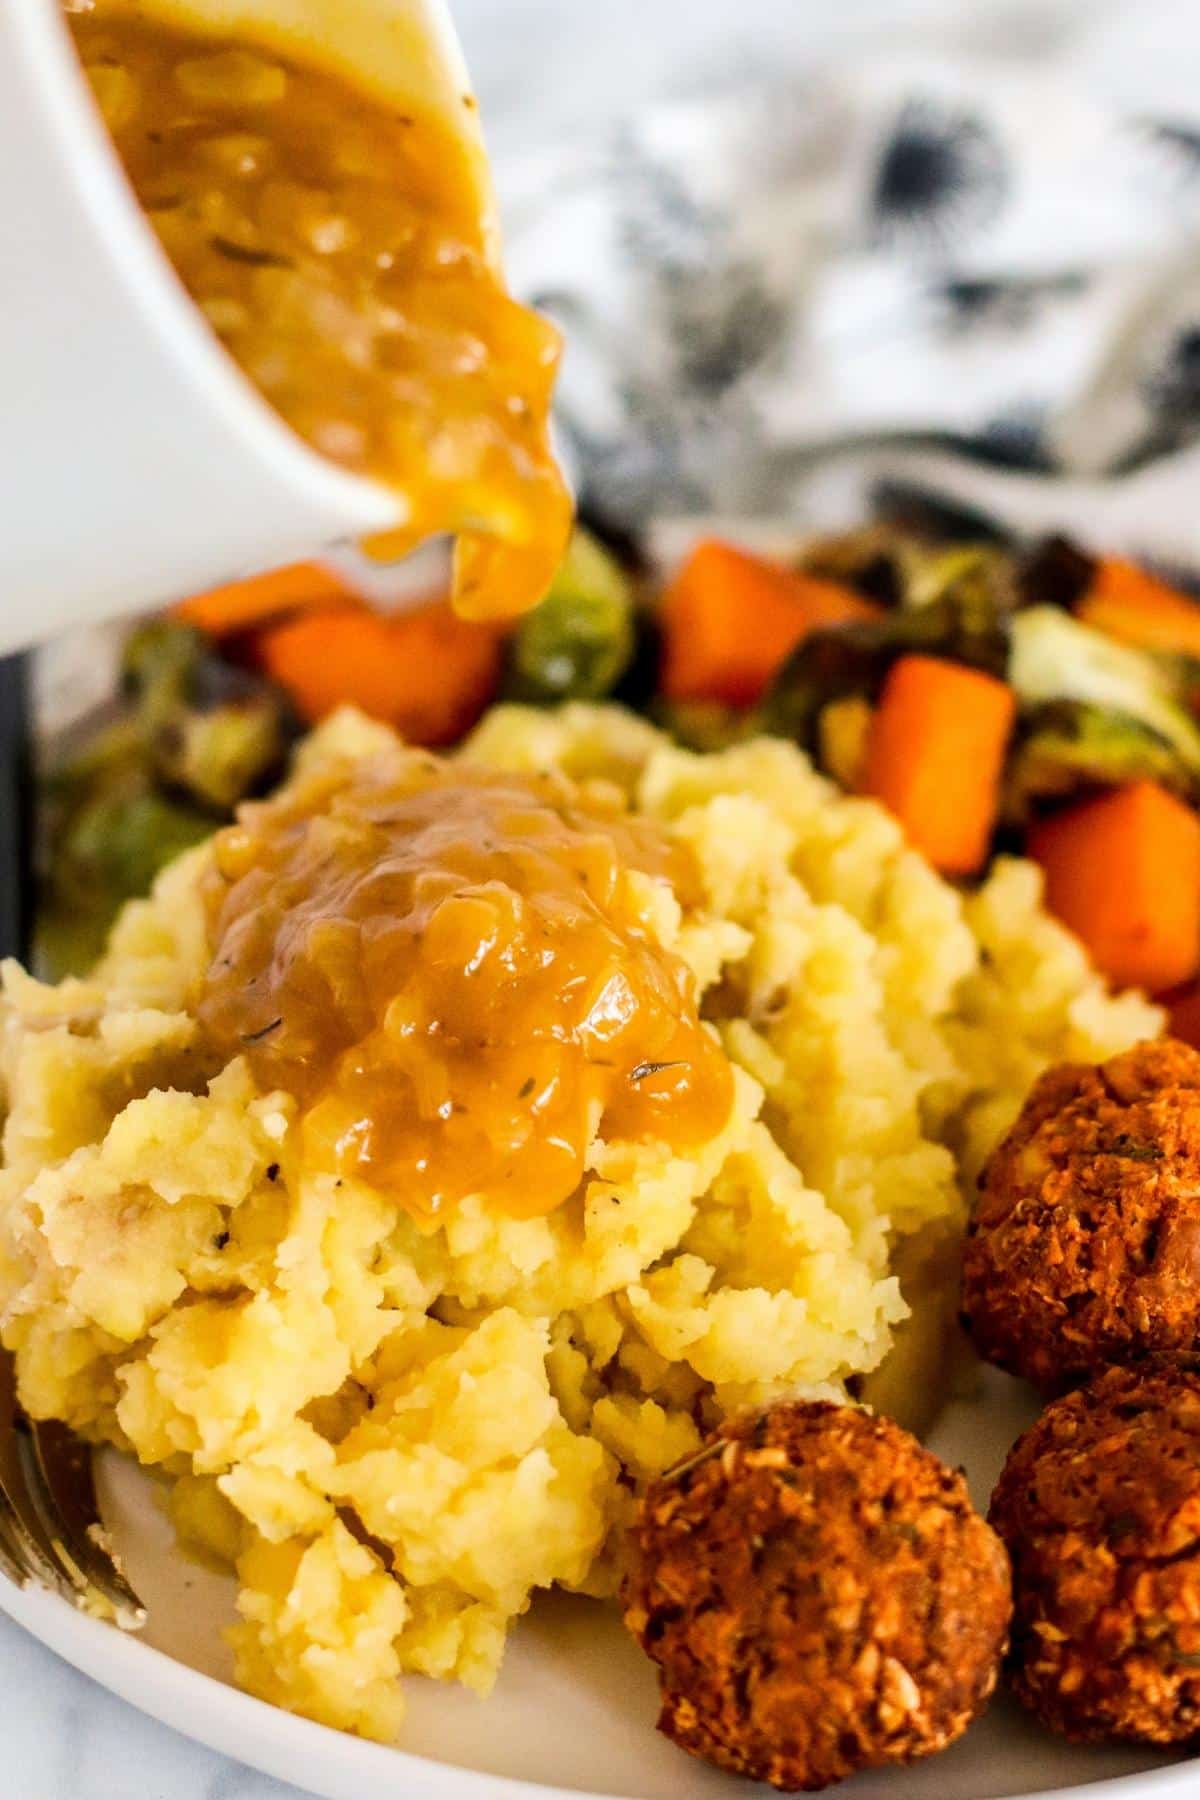 Pouring onion gravy over mashed potatoes on a dinner plate with roasted vegetables and tofu meatballs.